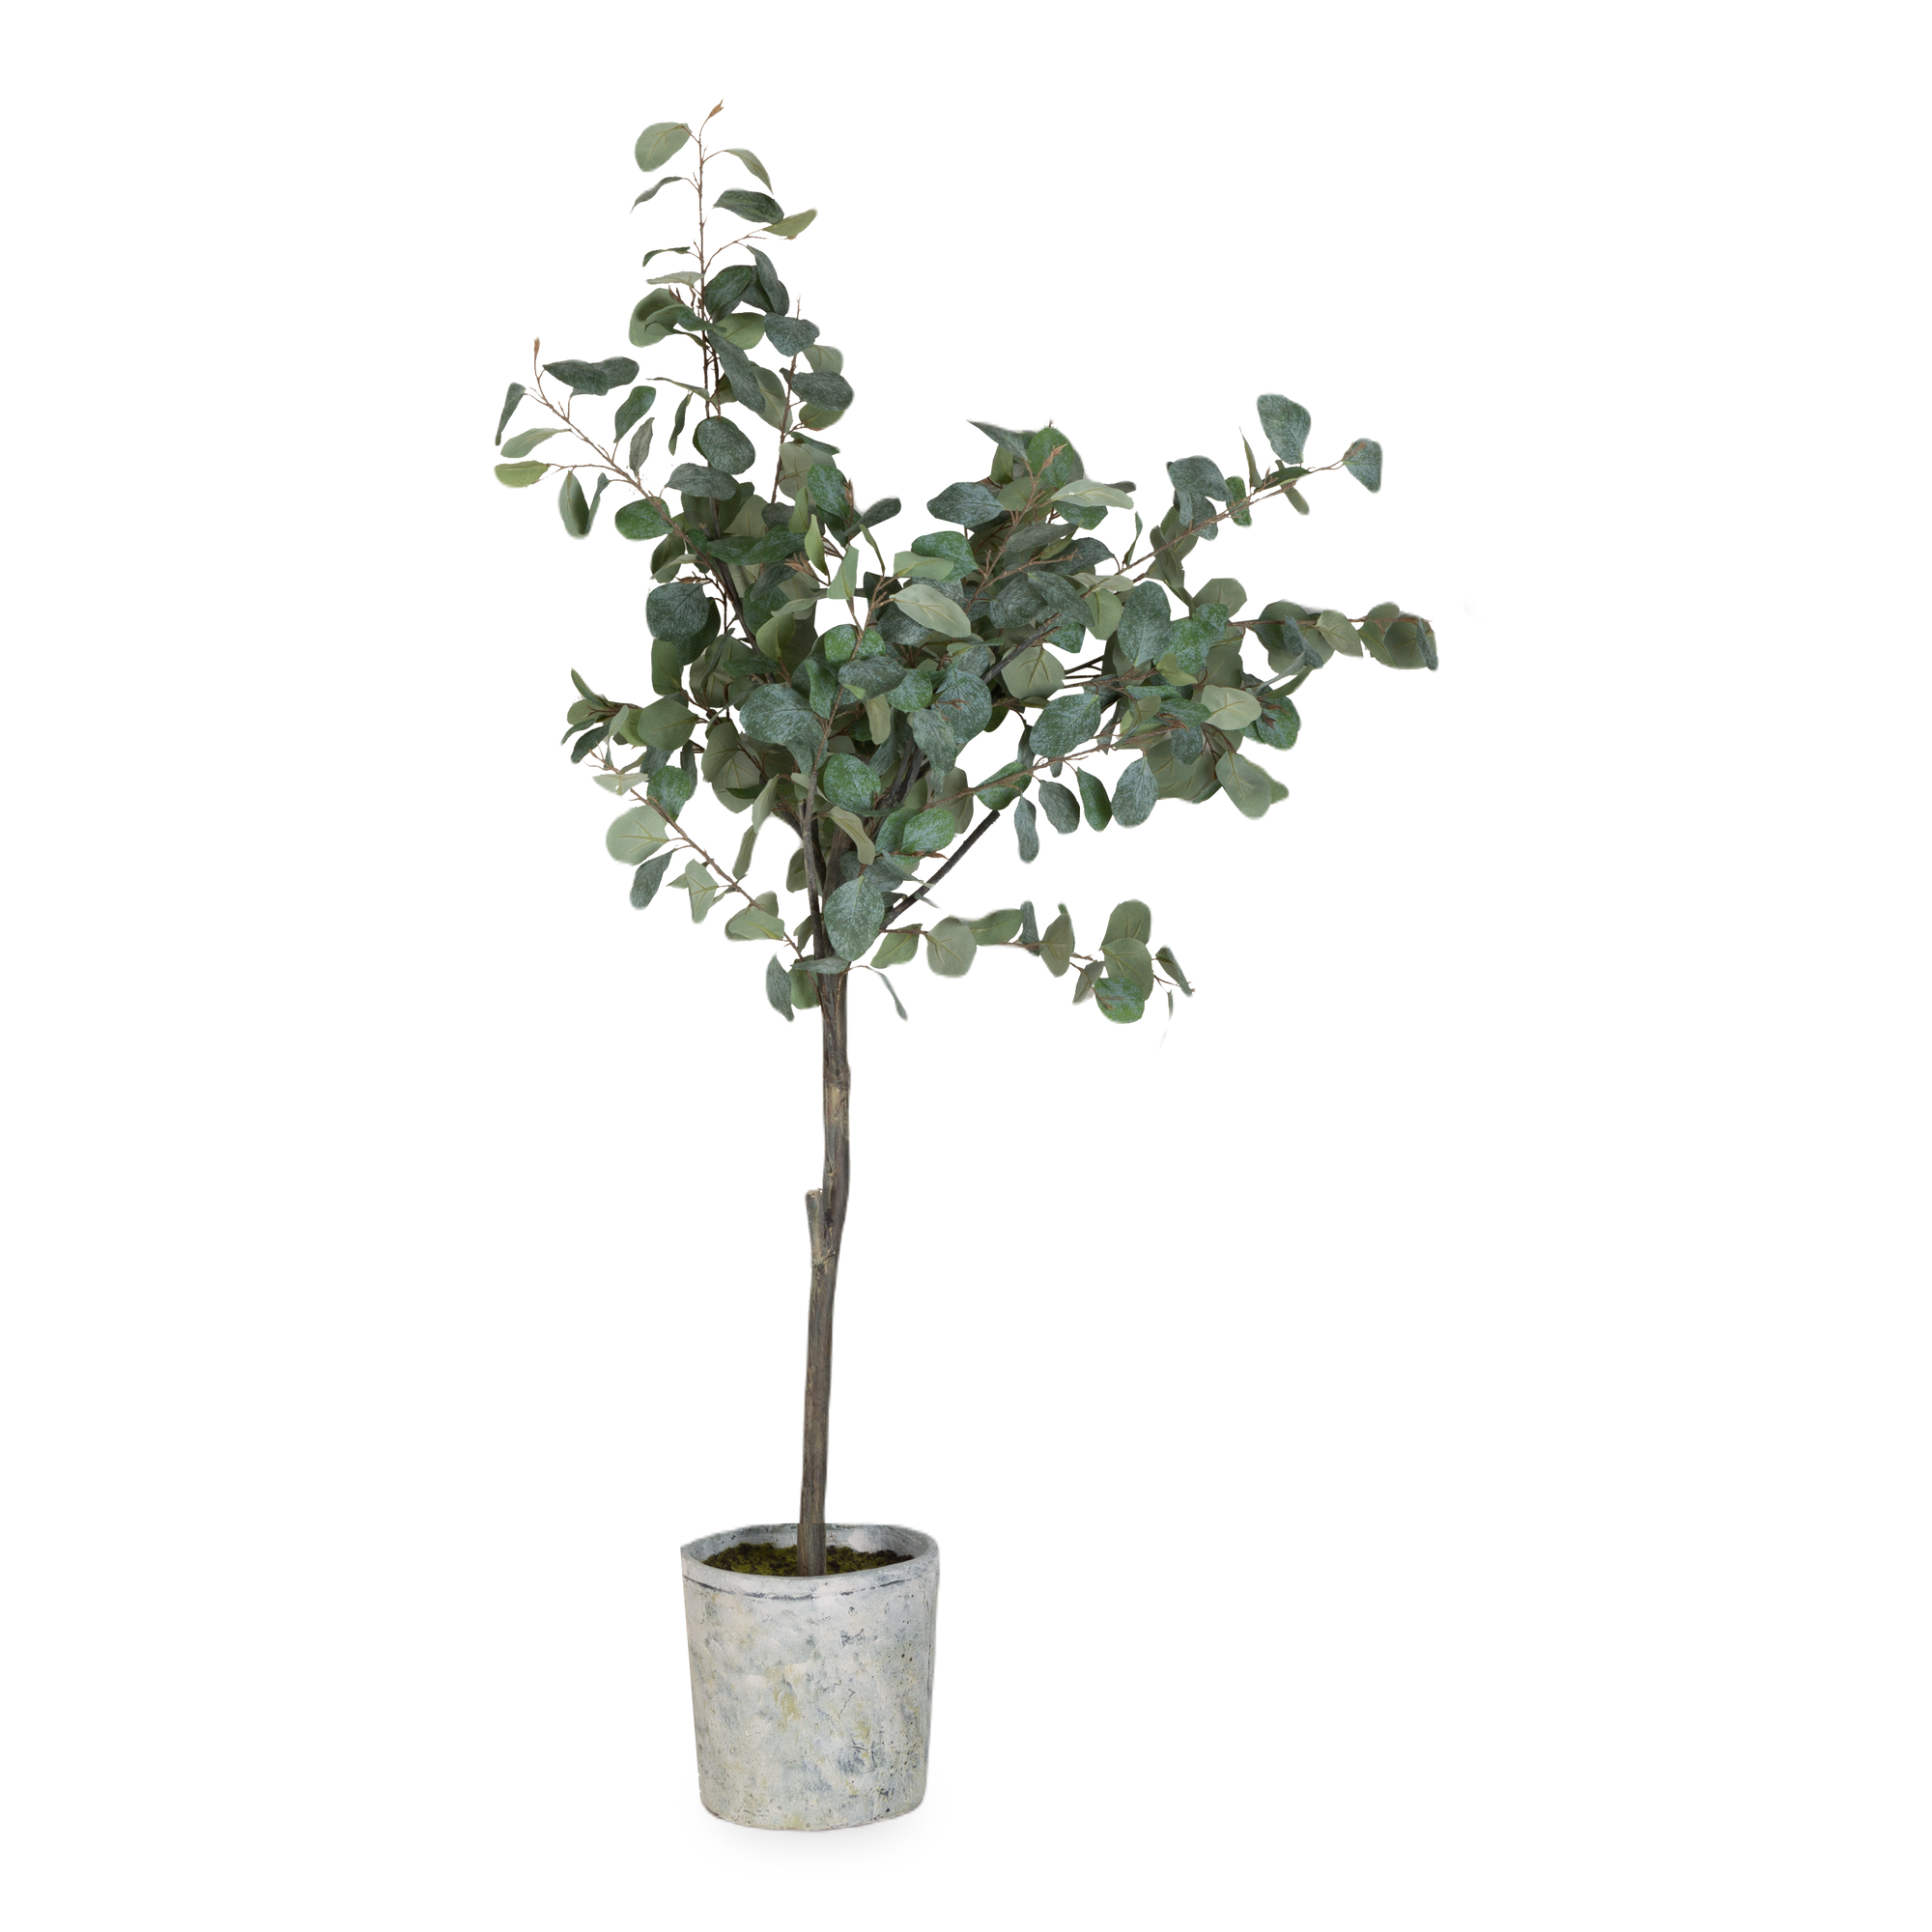 Bringing a natural organic feel to any room, this welcoming Eucalyptus Tree stands 5 feet tall with its cement pot.